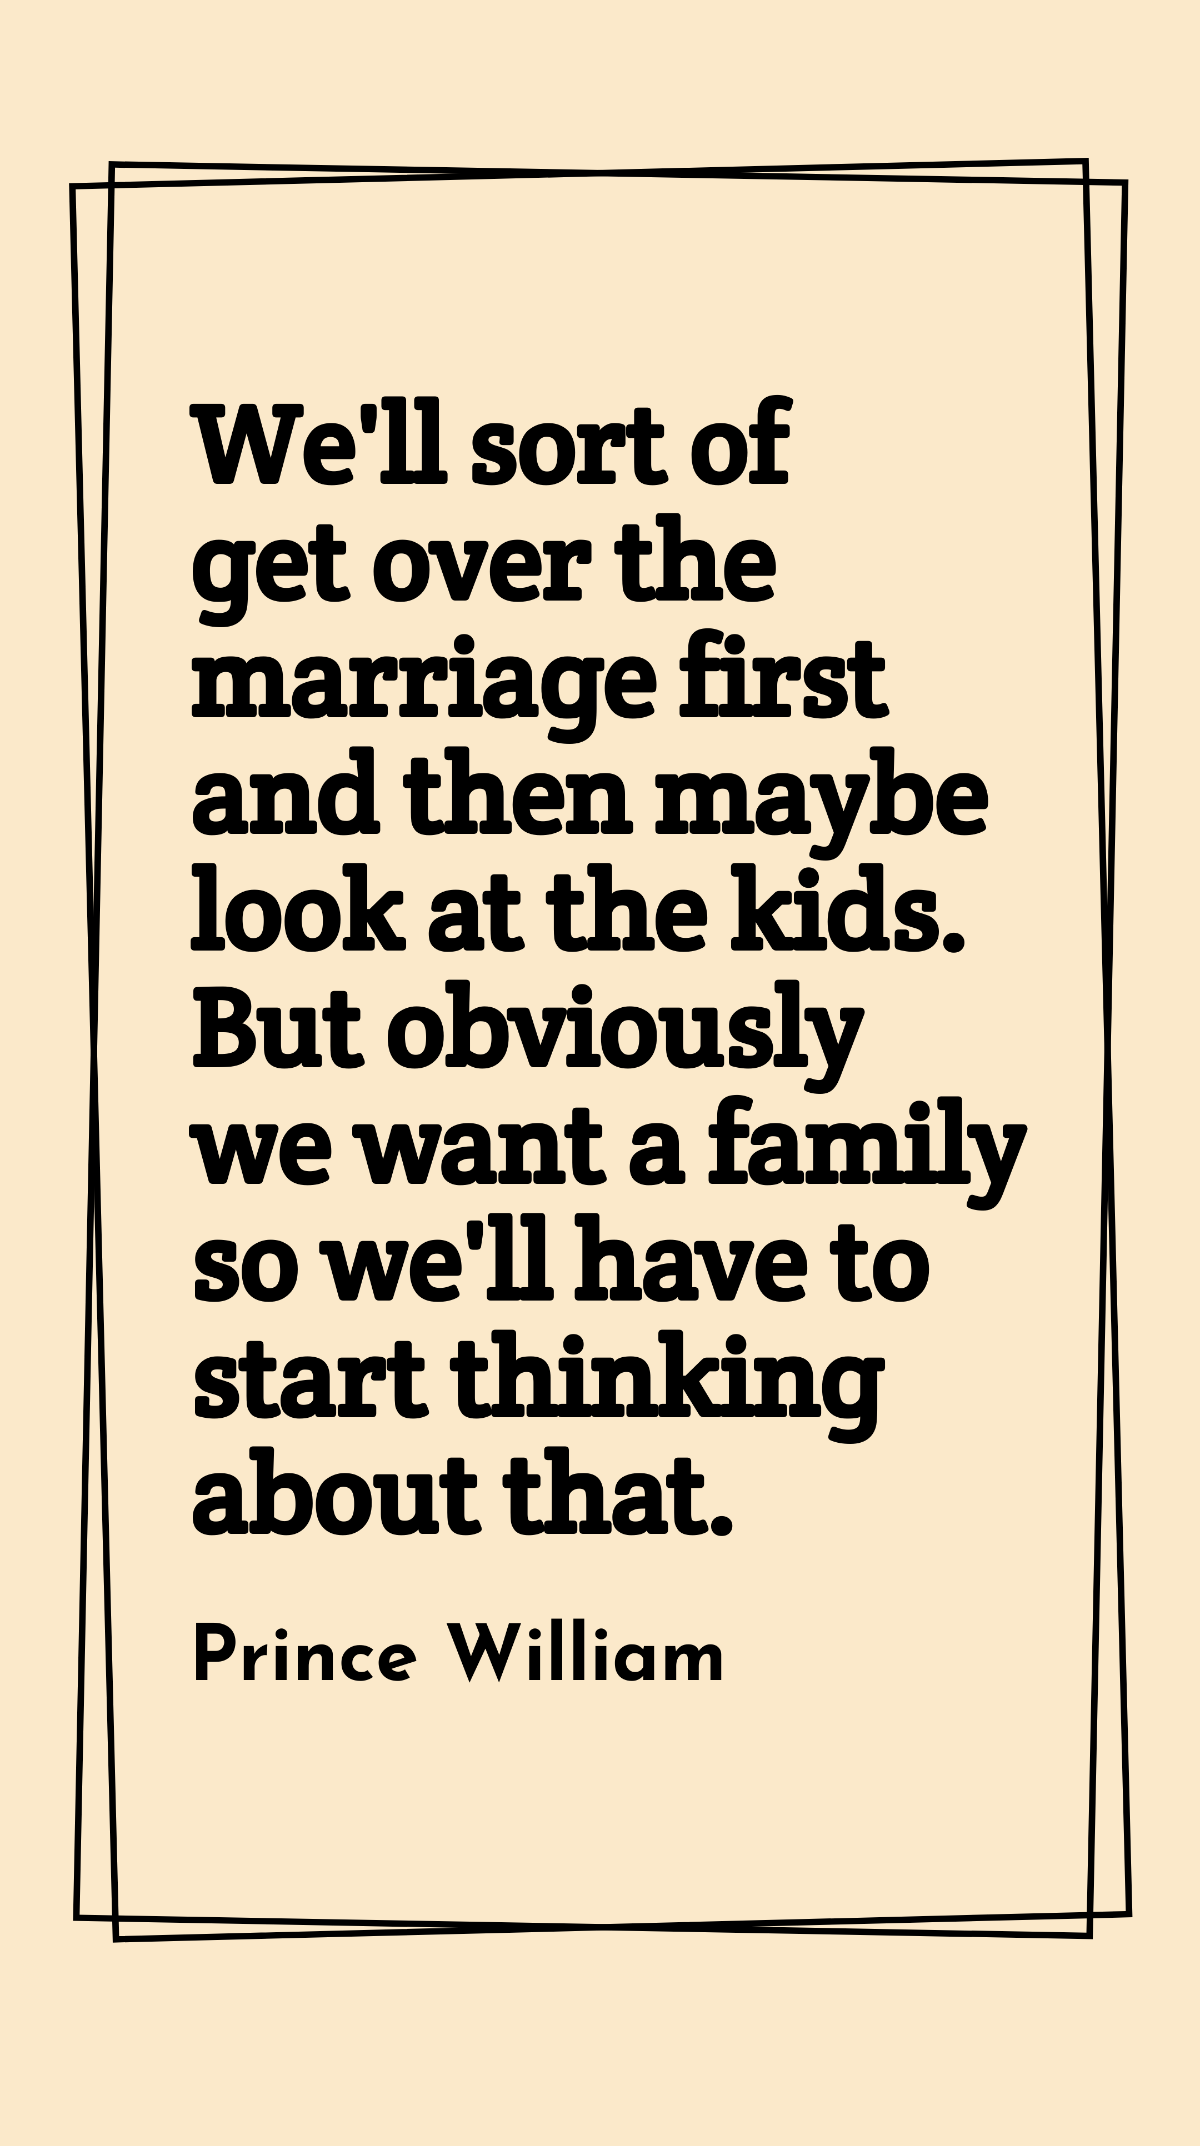 Prince William - We'll sort of get over the marriage first and then maybe look at the kids. But obviously we want a family so we'll have to start thinking about that. Template